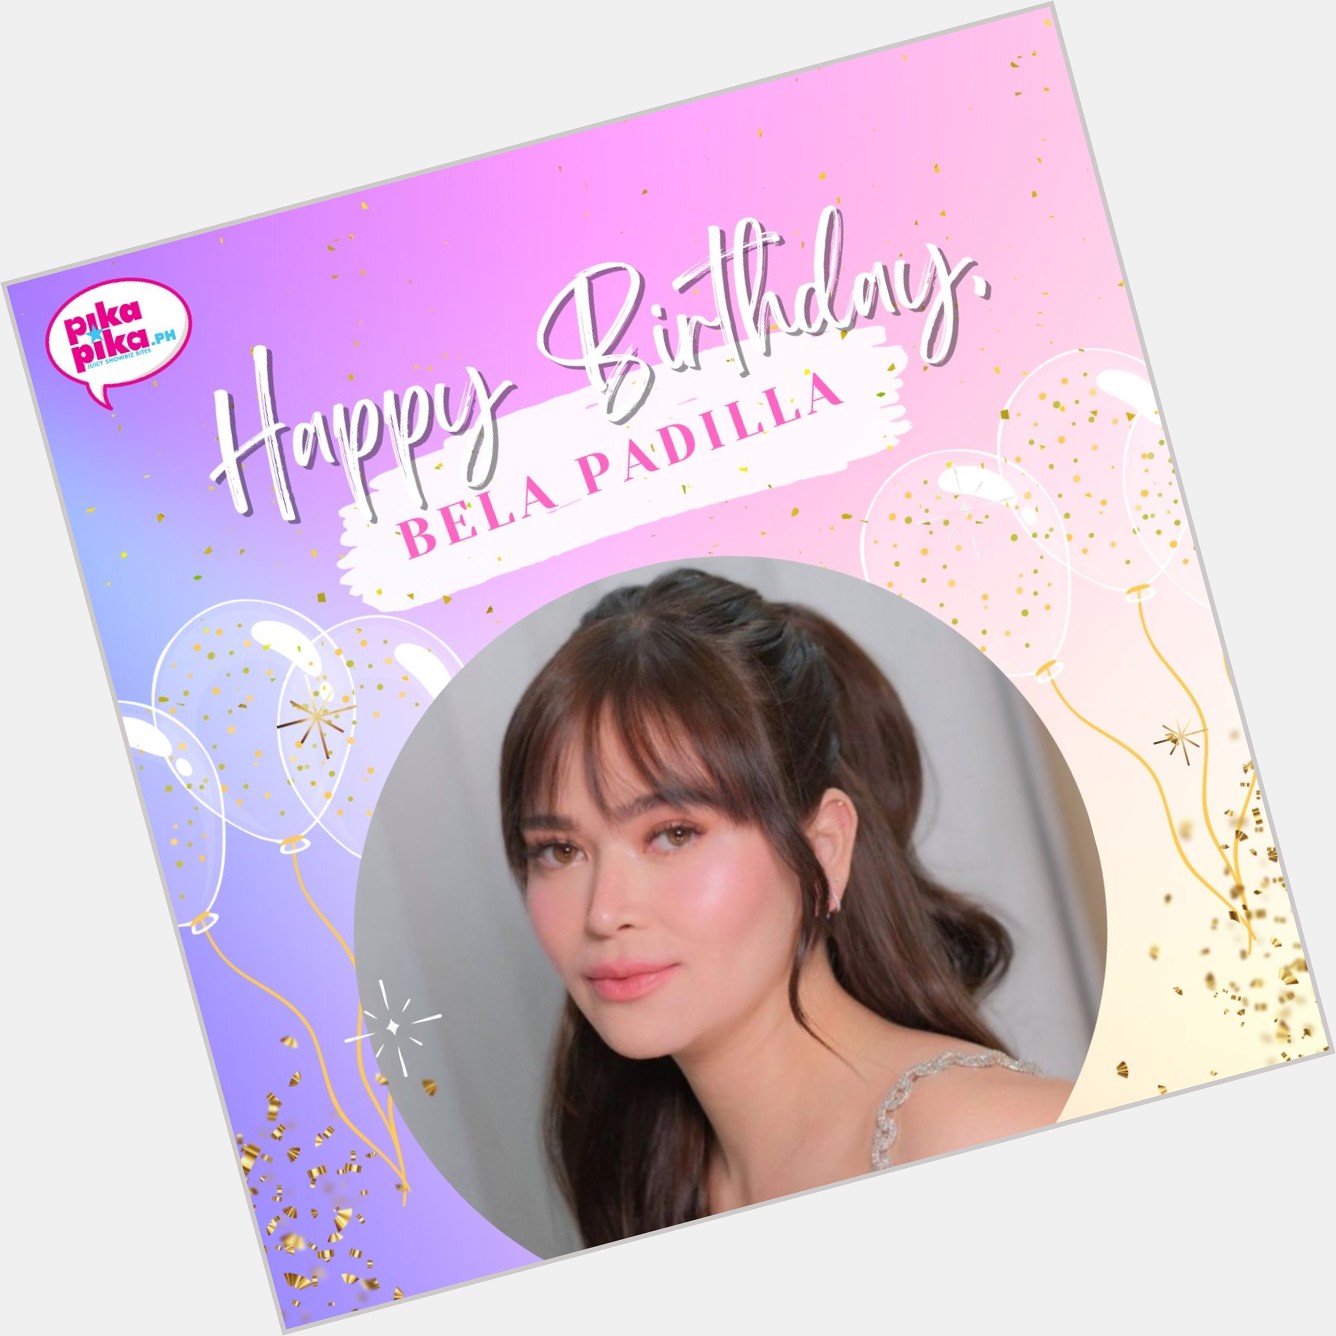 Happy birthday, Bela Padilla! May your special day be filled with love and cheers.    